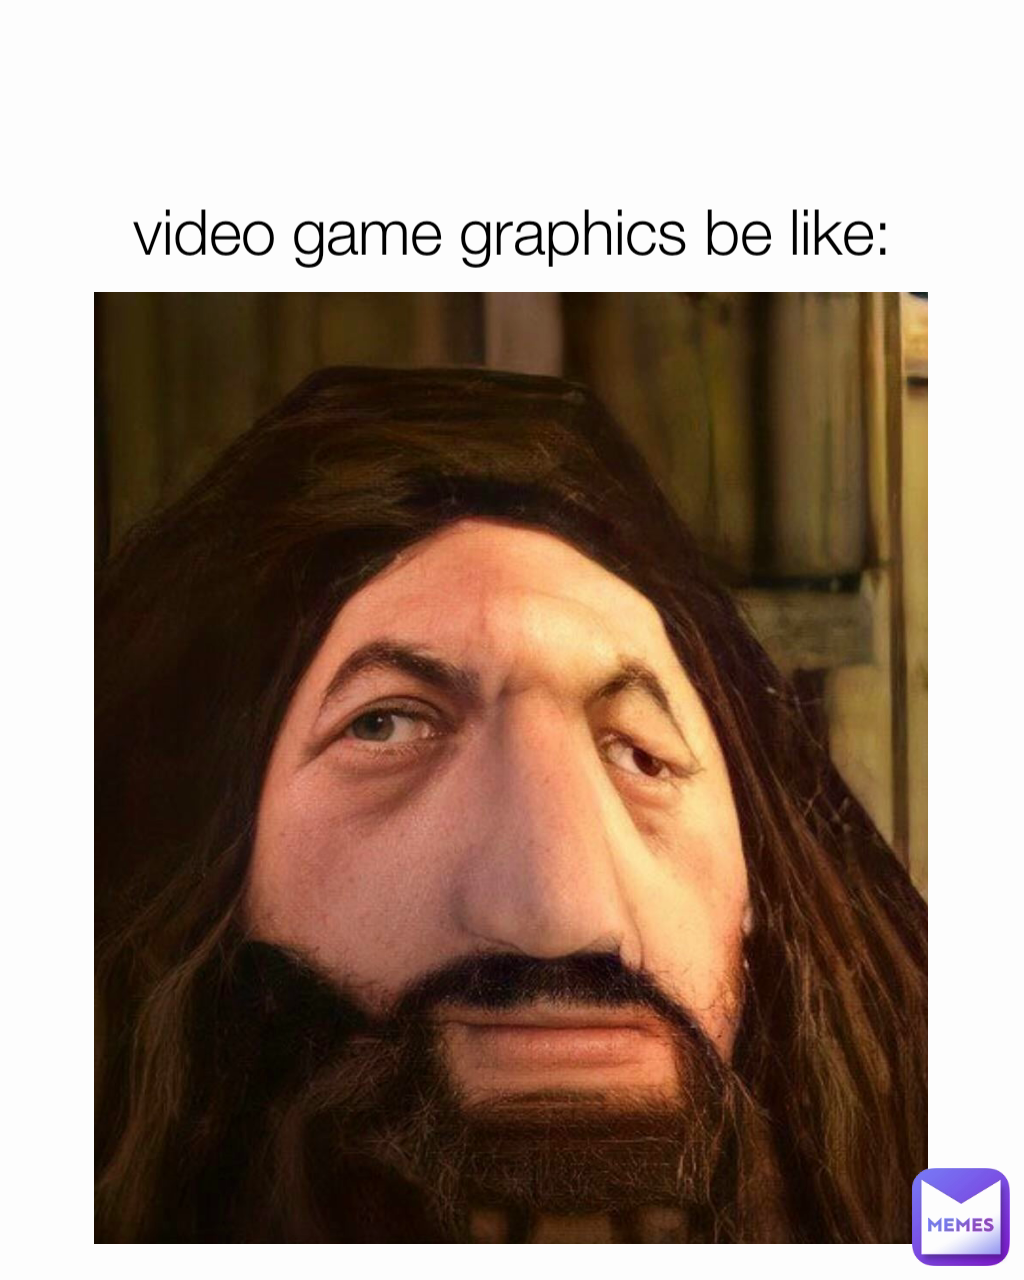 
video game graphics be like: